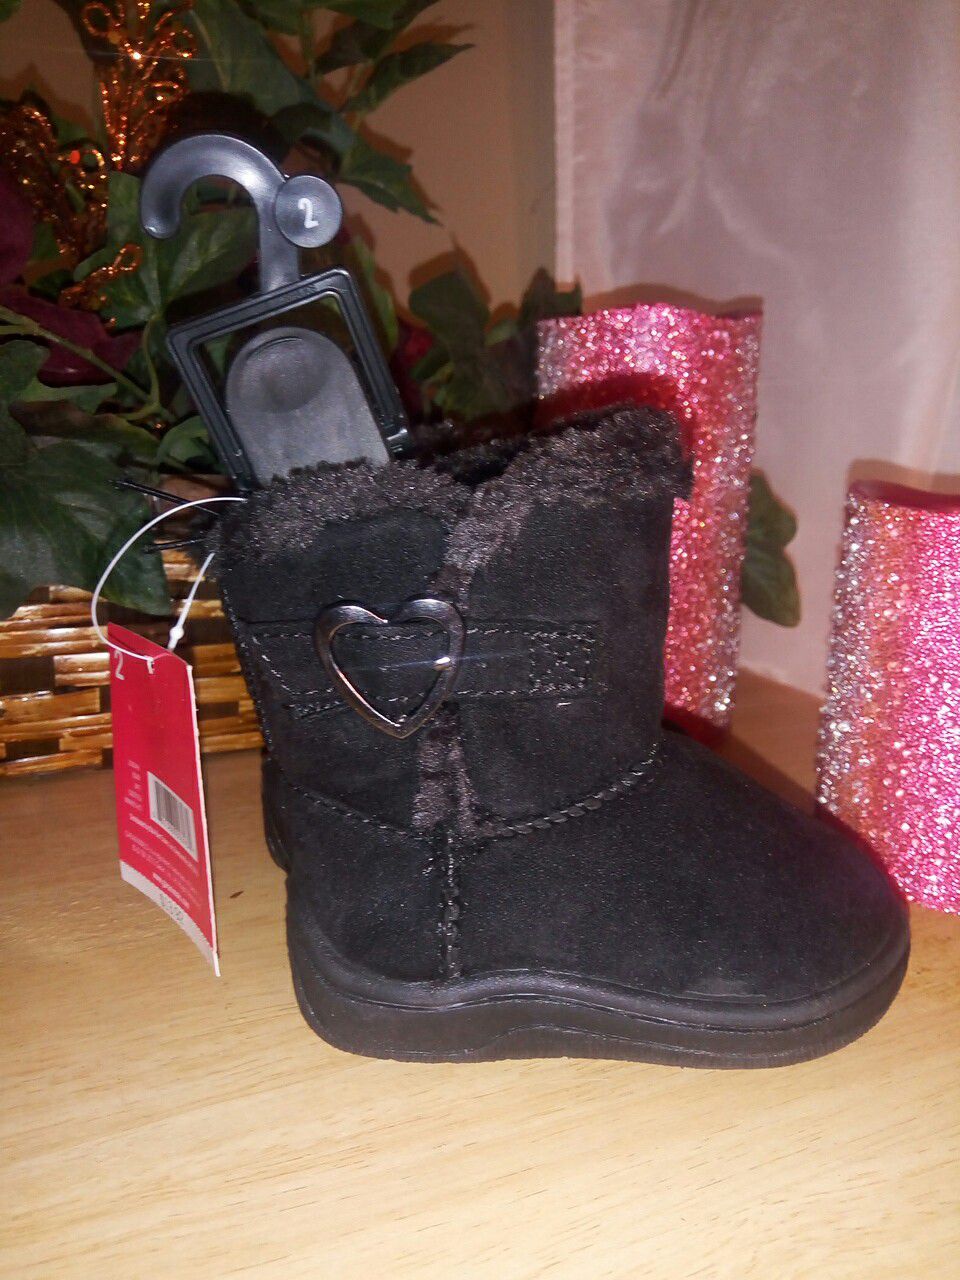 New toddler girl boots size 2